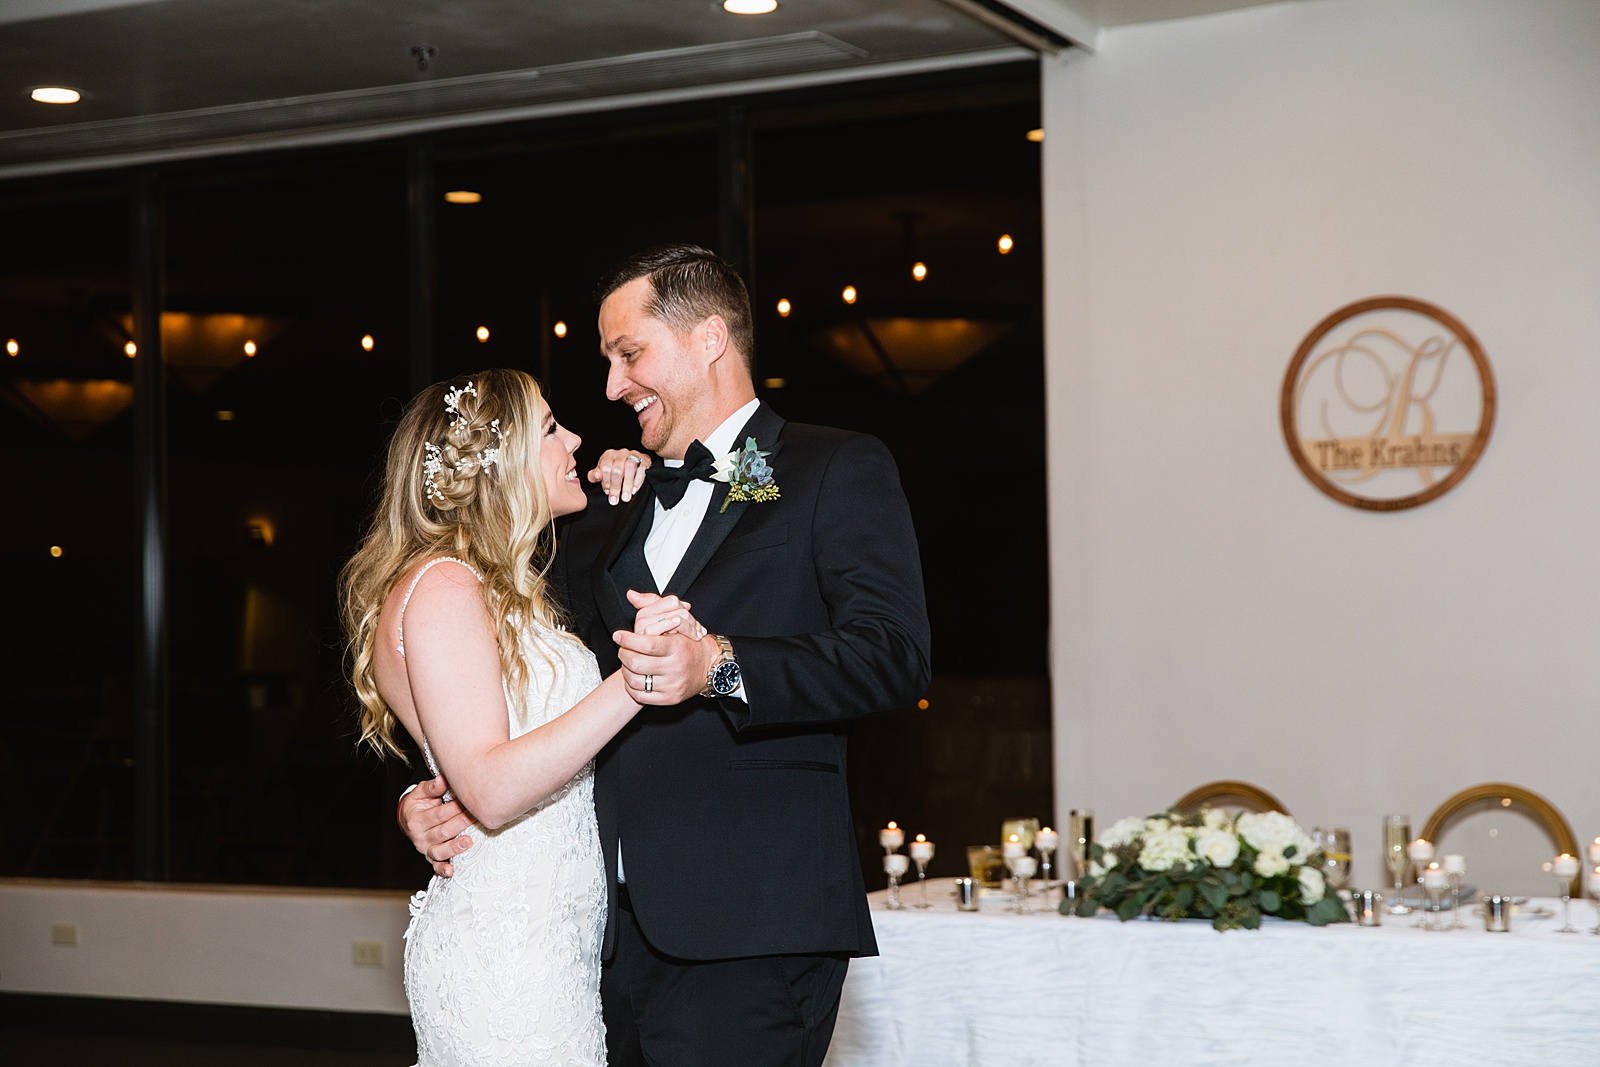 Newlyweds sharing first dance at their Troon North wedding reception by Arizona wedding photographer PMA Photography.